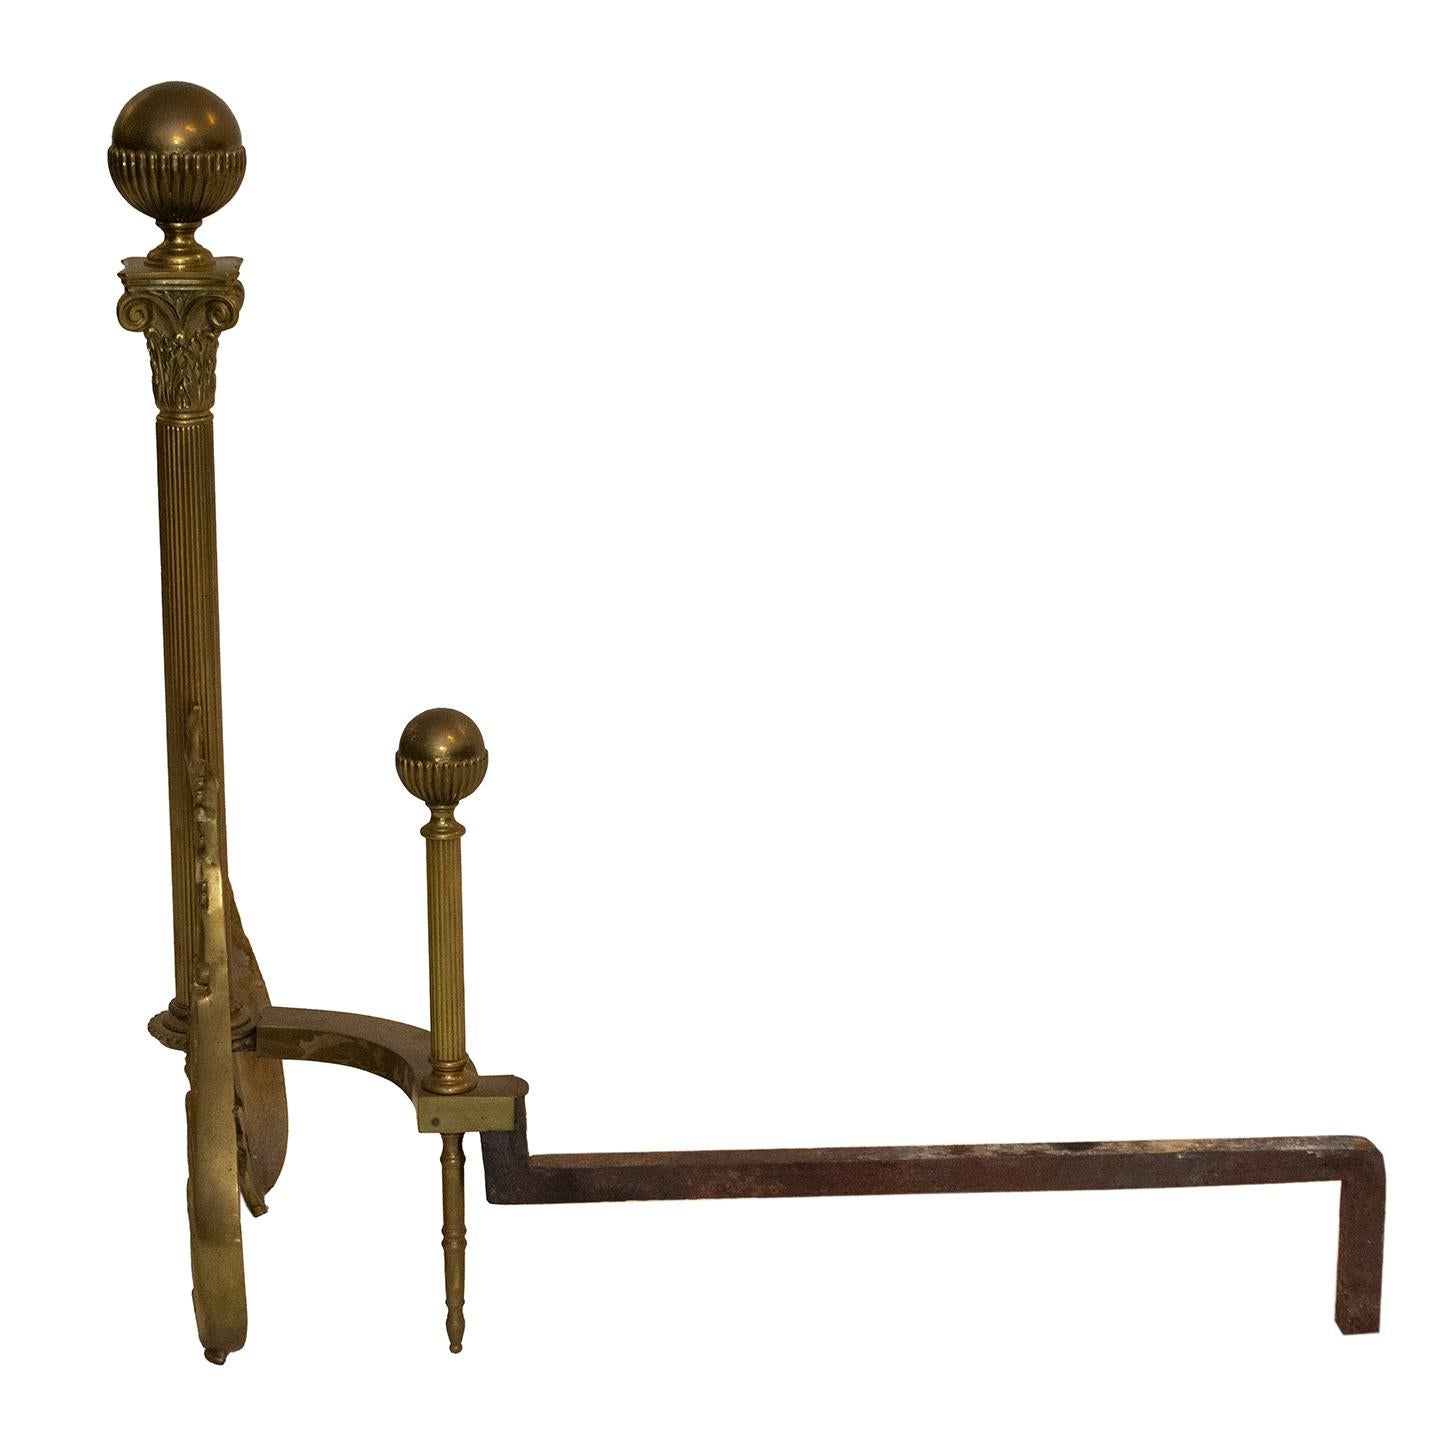 Decorative Vintage Neoclassical-Inspired Brass and Iron Andirons In Good Condition For Sale In Wilton, CT